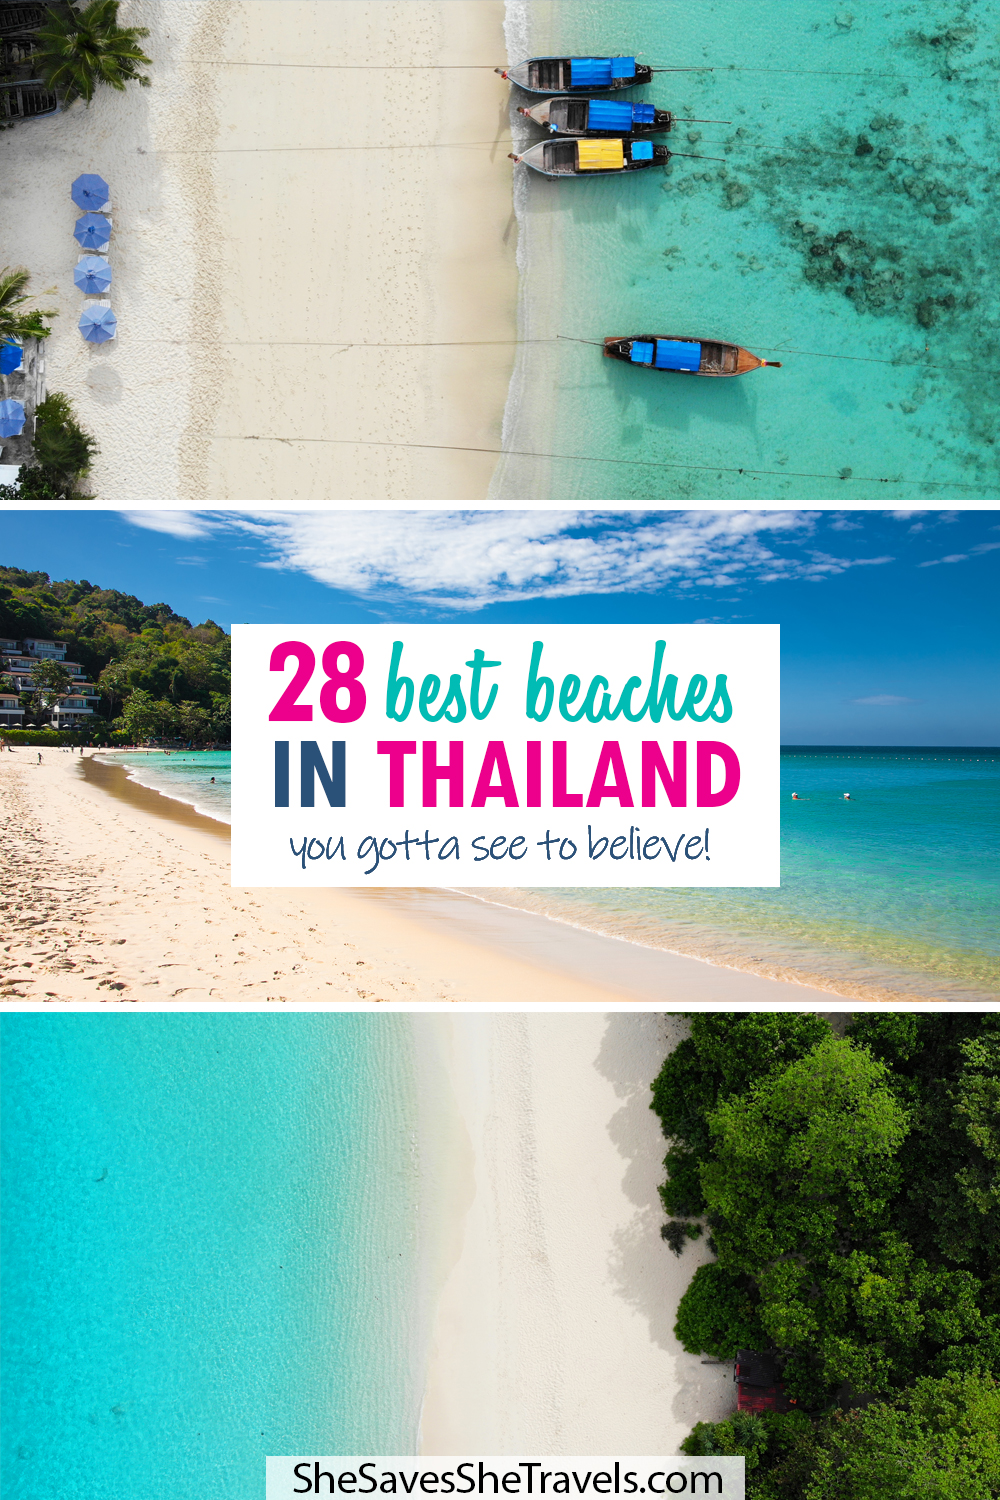 28 best beaches in thailand you gotta see to believe with 3 photos of beaches with boats and sand and teal water